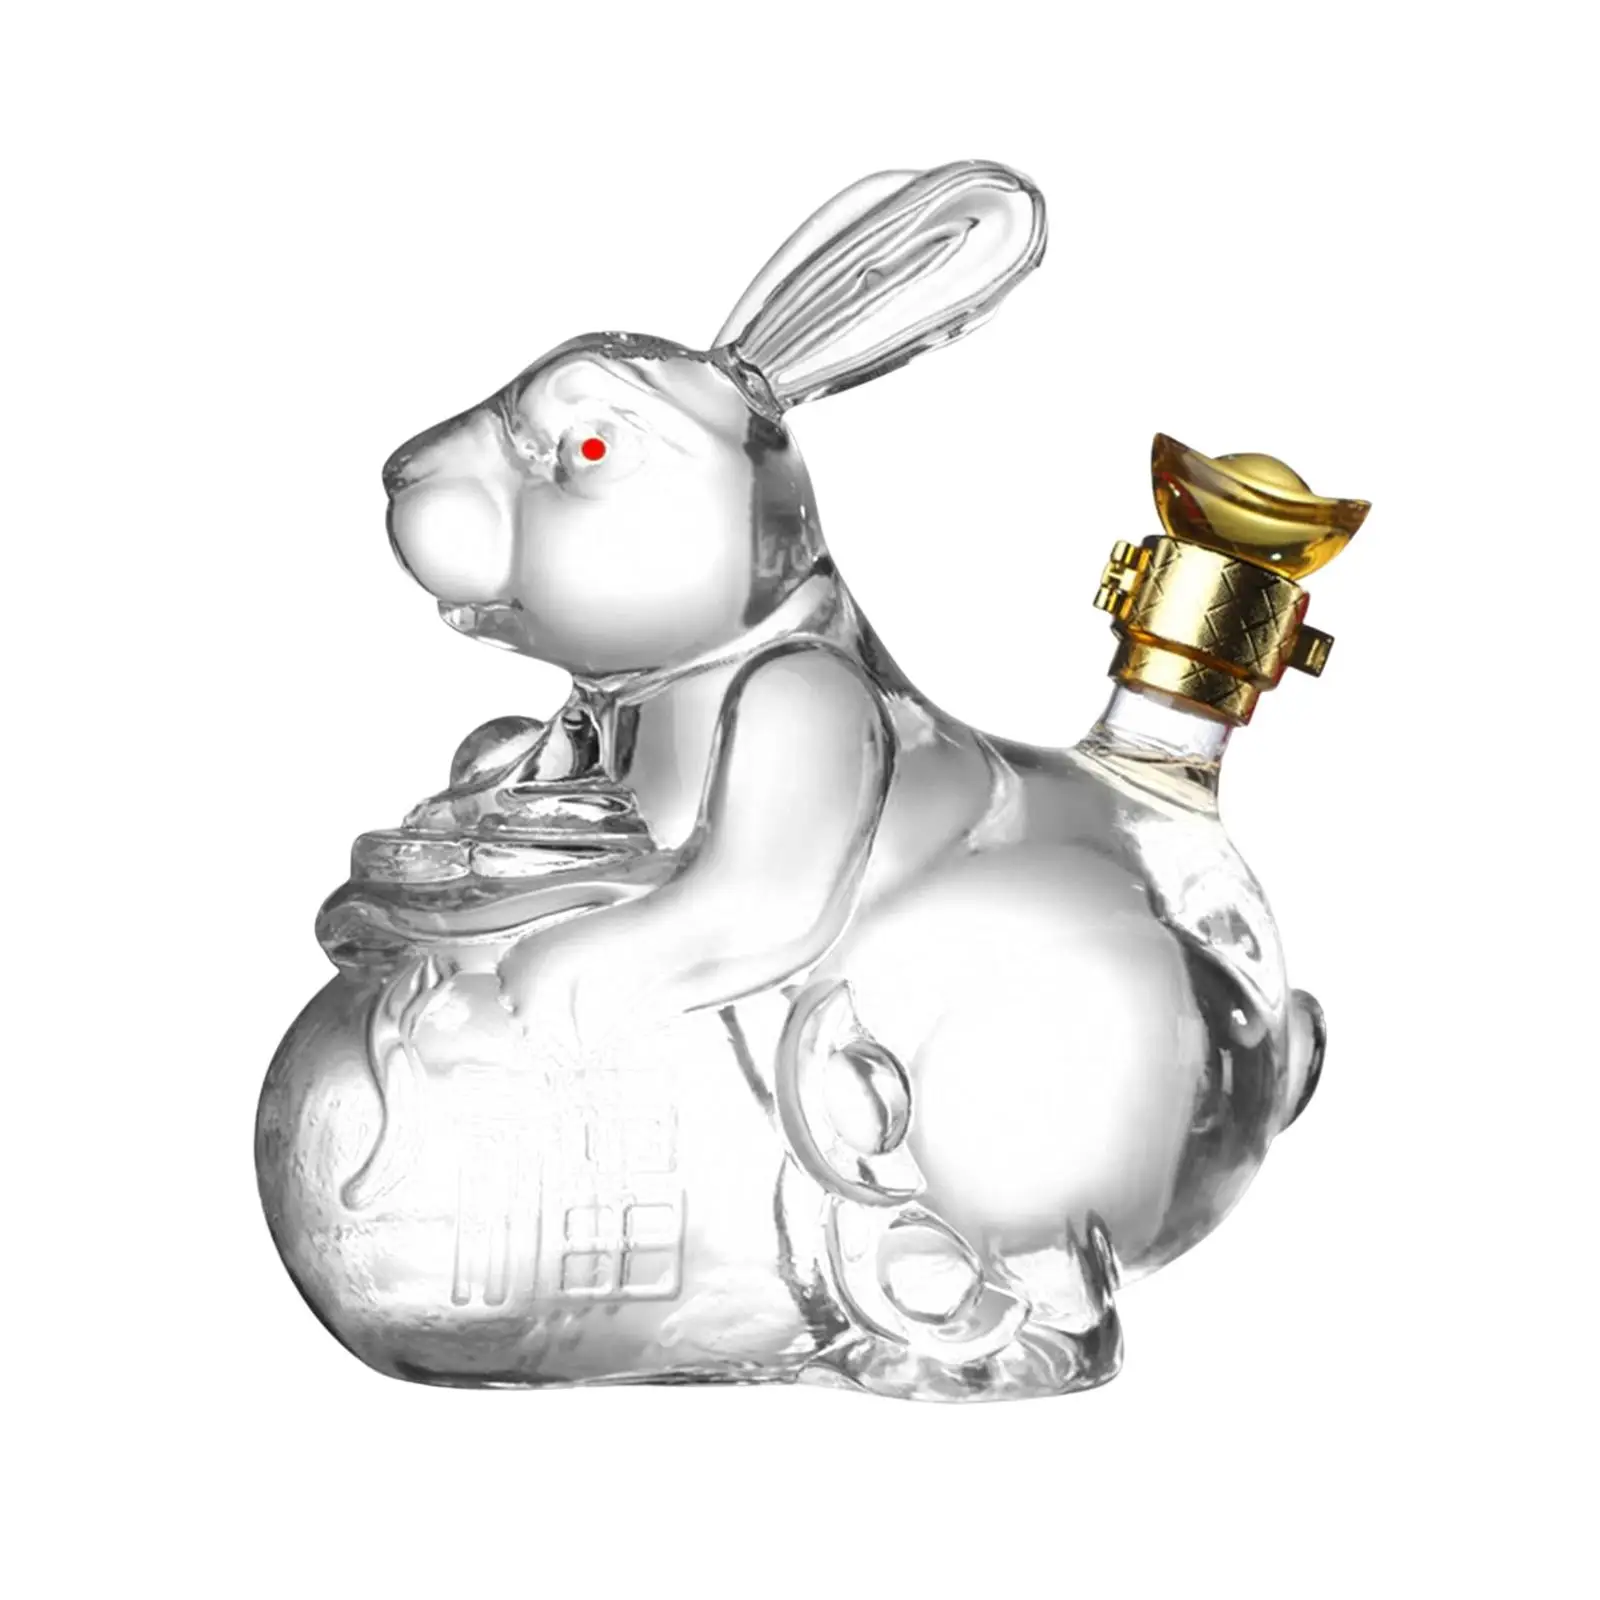 Animal Shaped Style Decanter Clear Bottle Hand Blown Novelty with Stopper Accessories Glass for